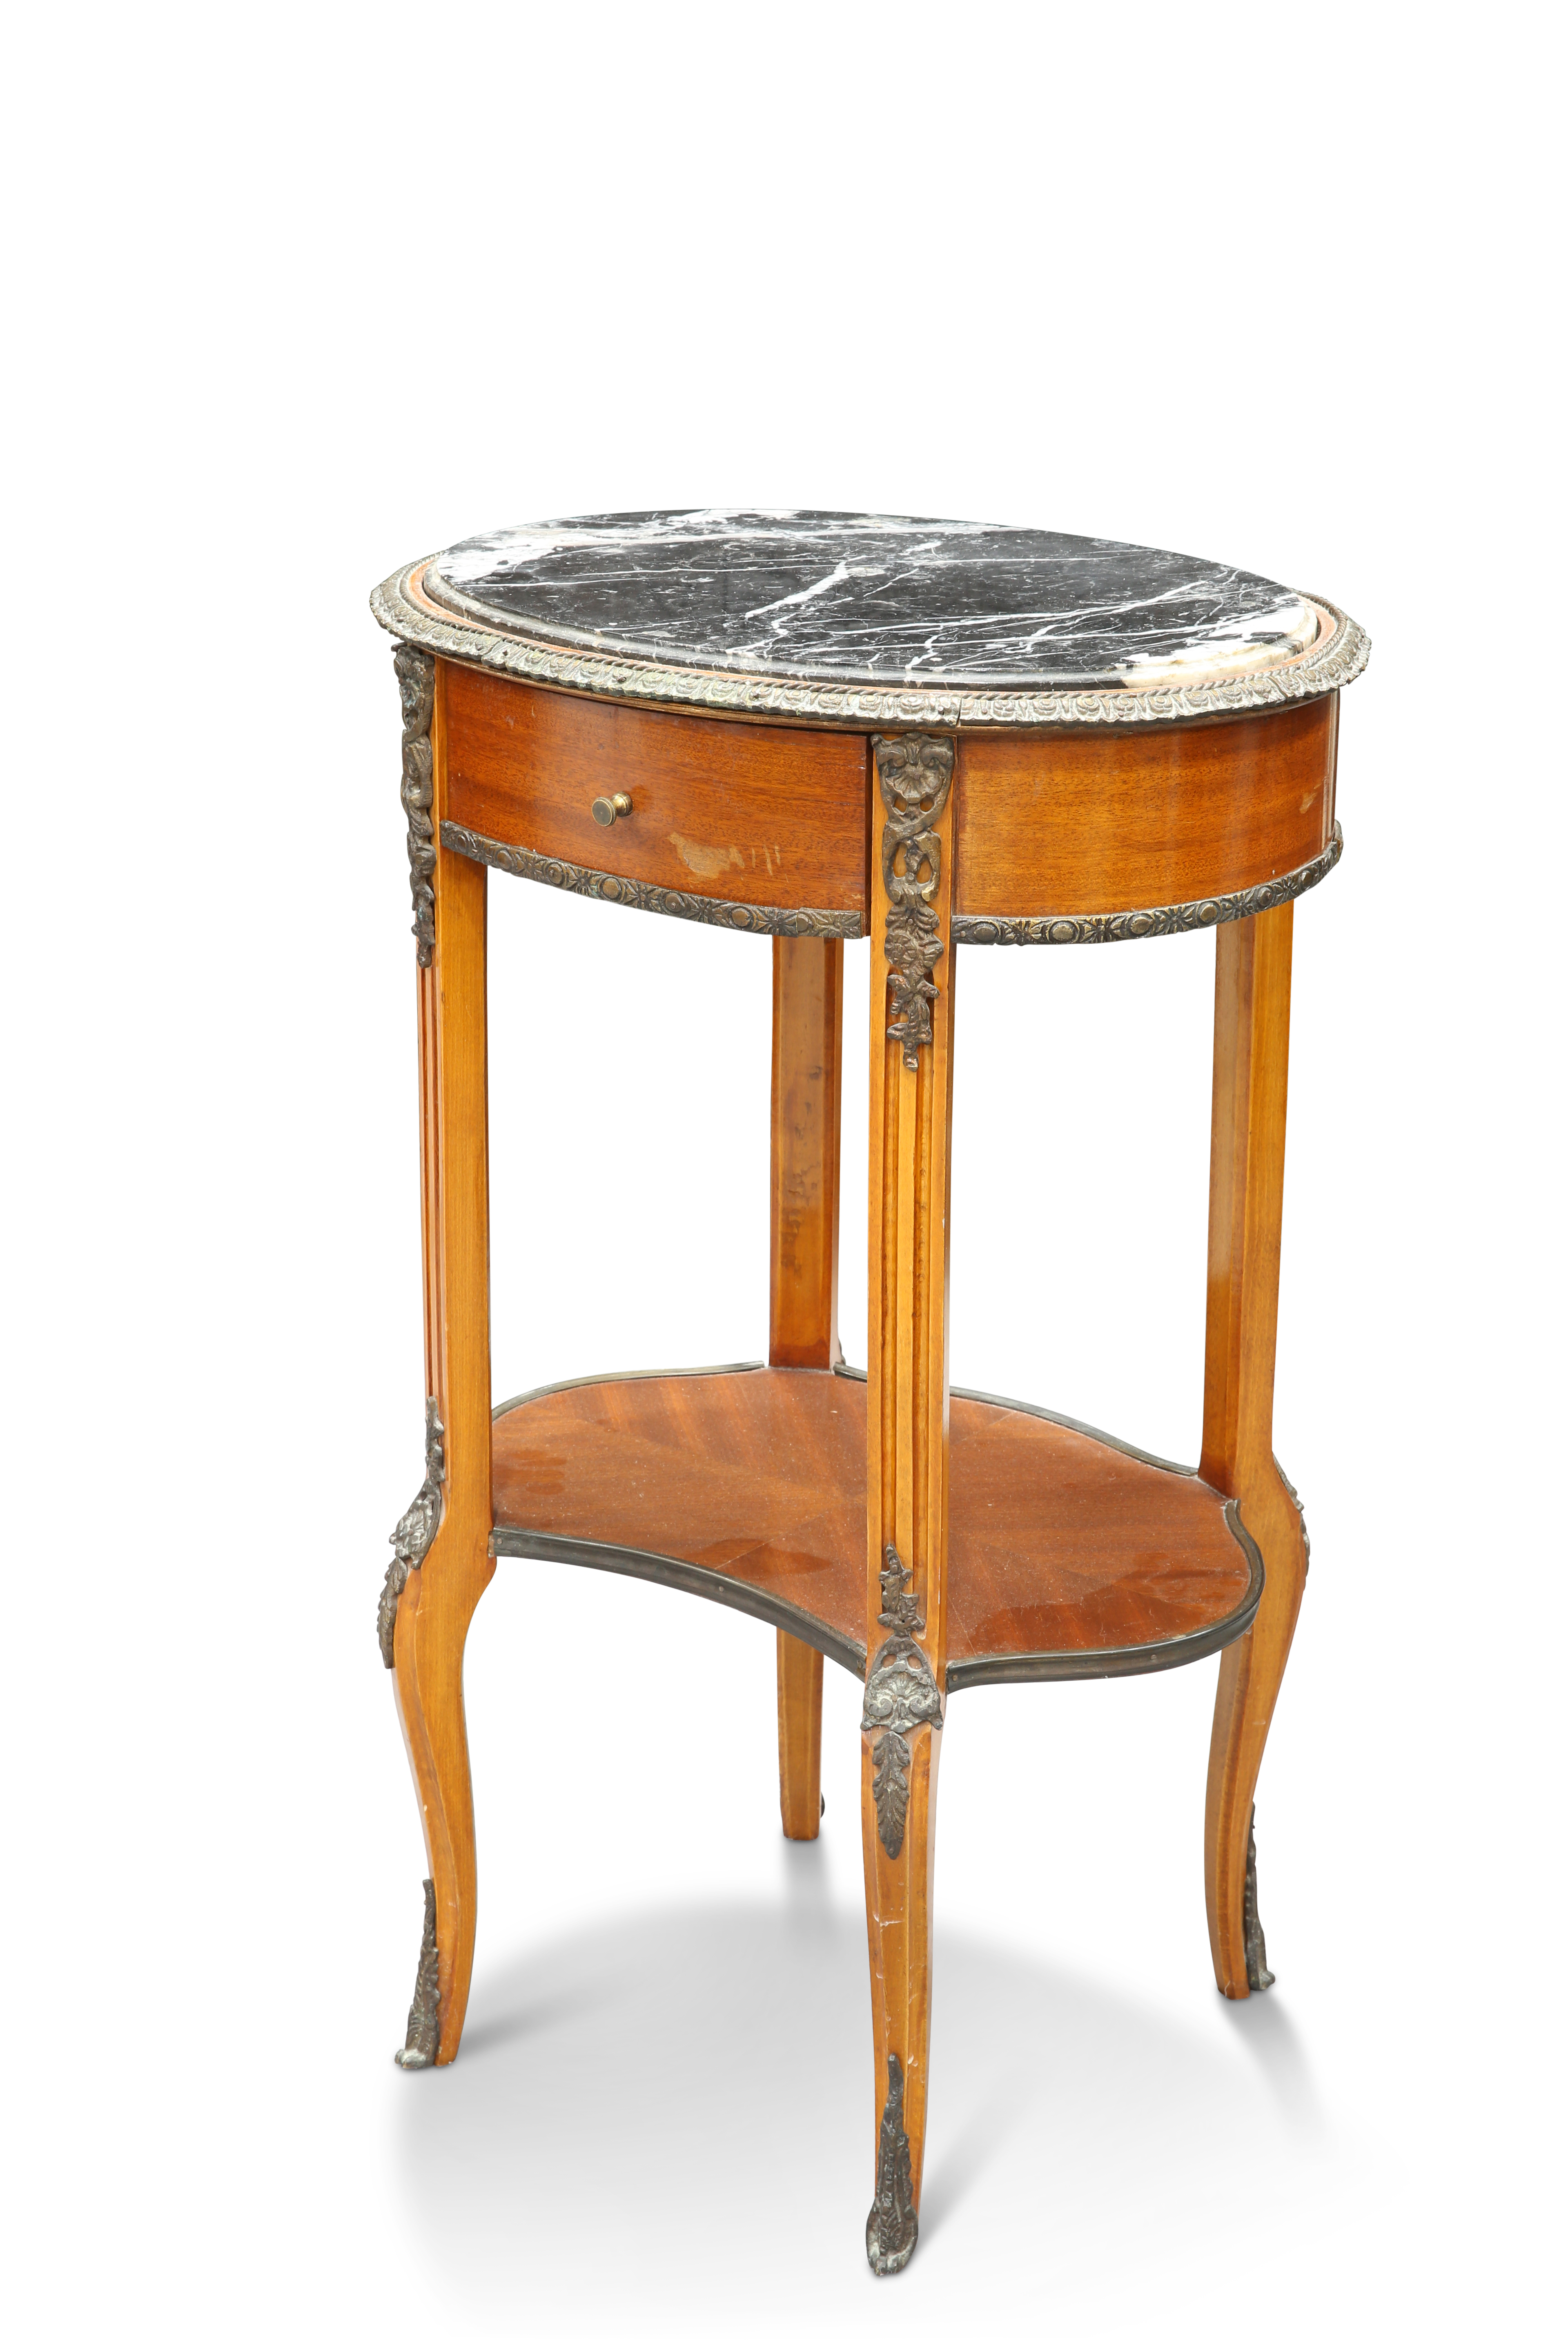 A FRENCH MARBLE TOPPED AND GILT-METAL MOUNTED OCCASIONAL TABLE - Image 2 of 2